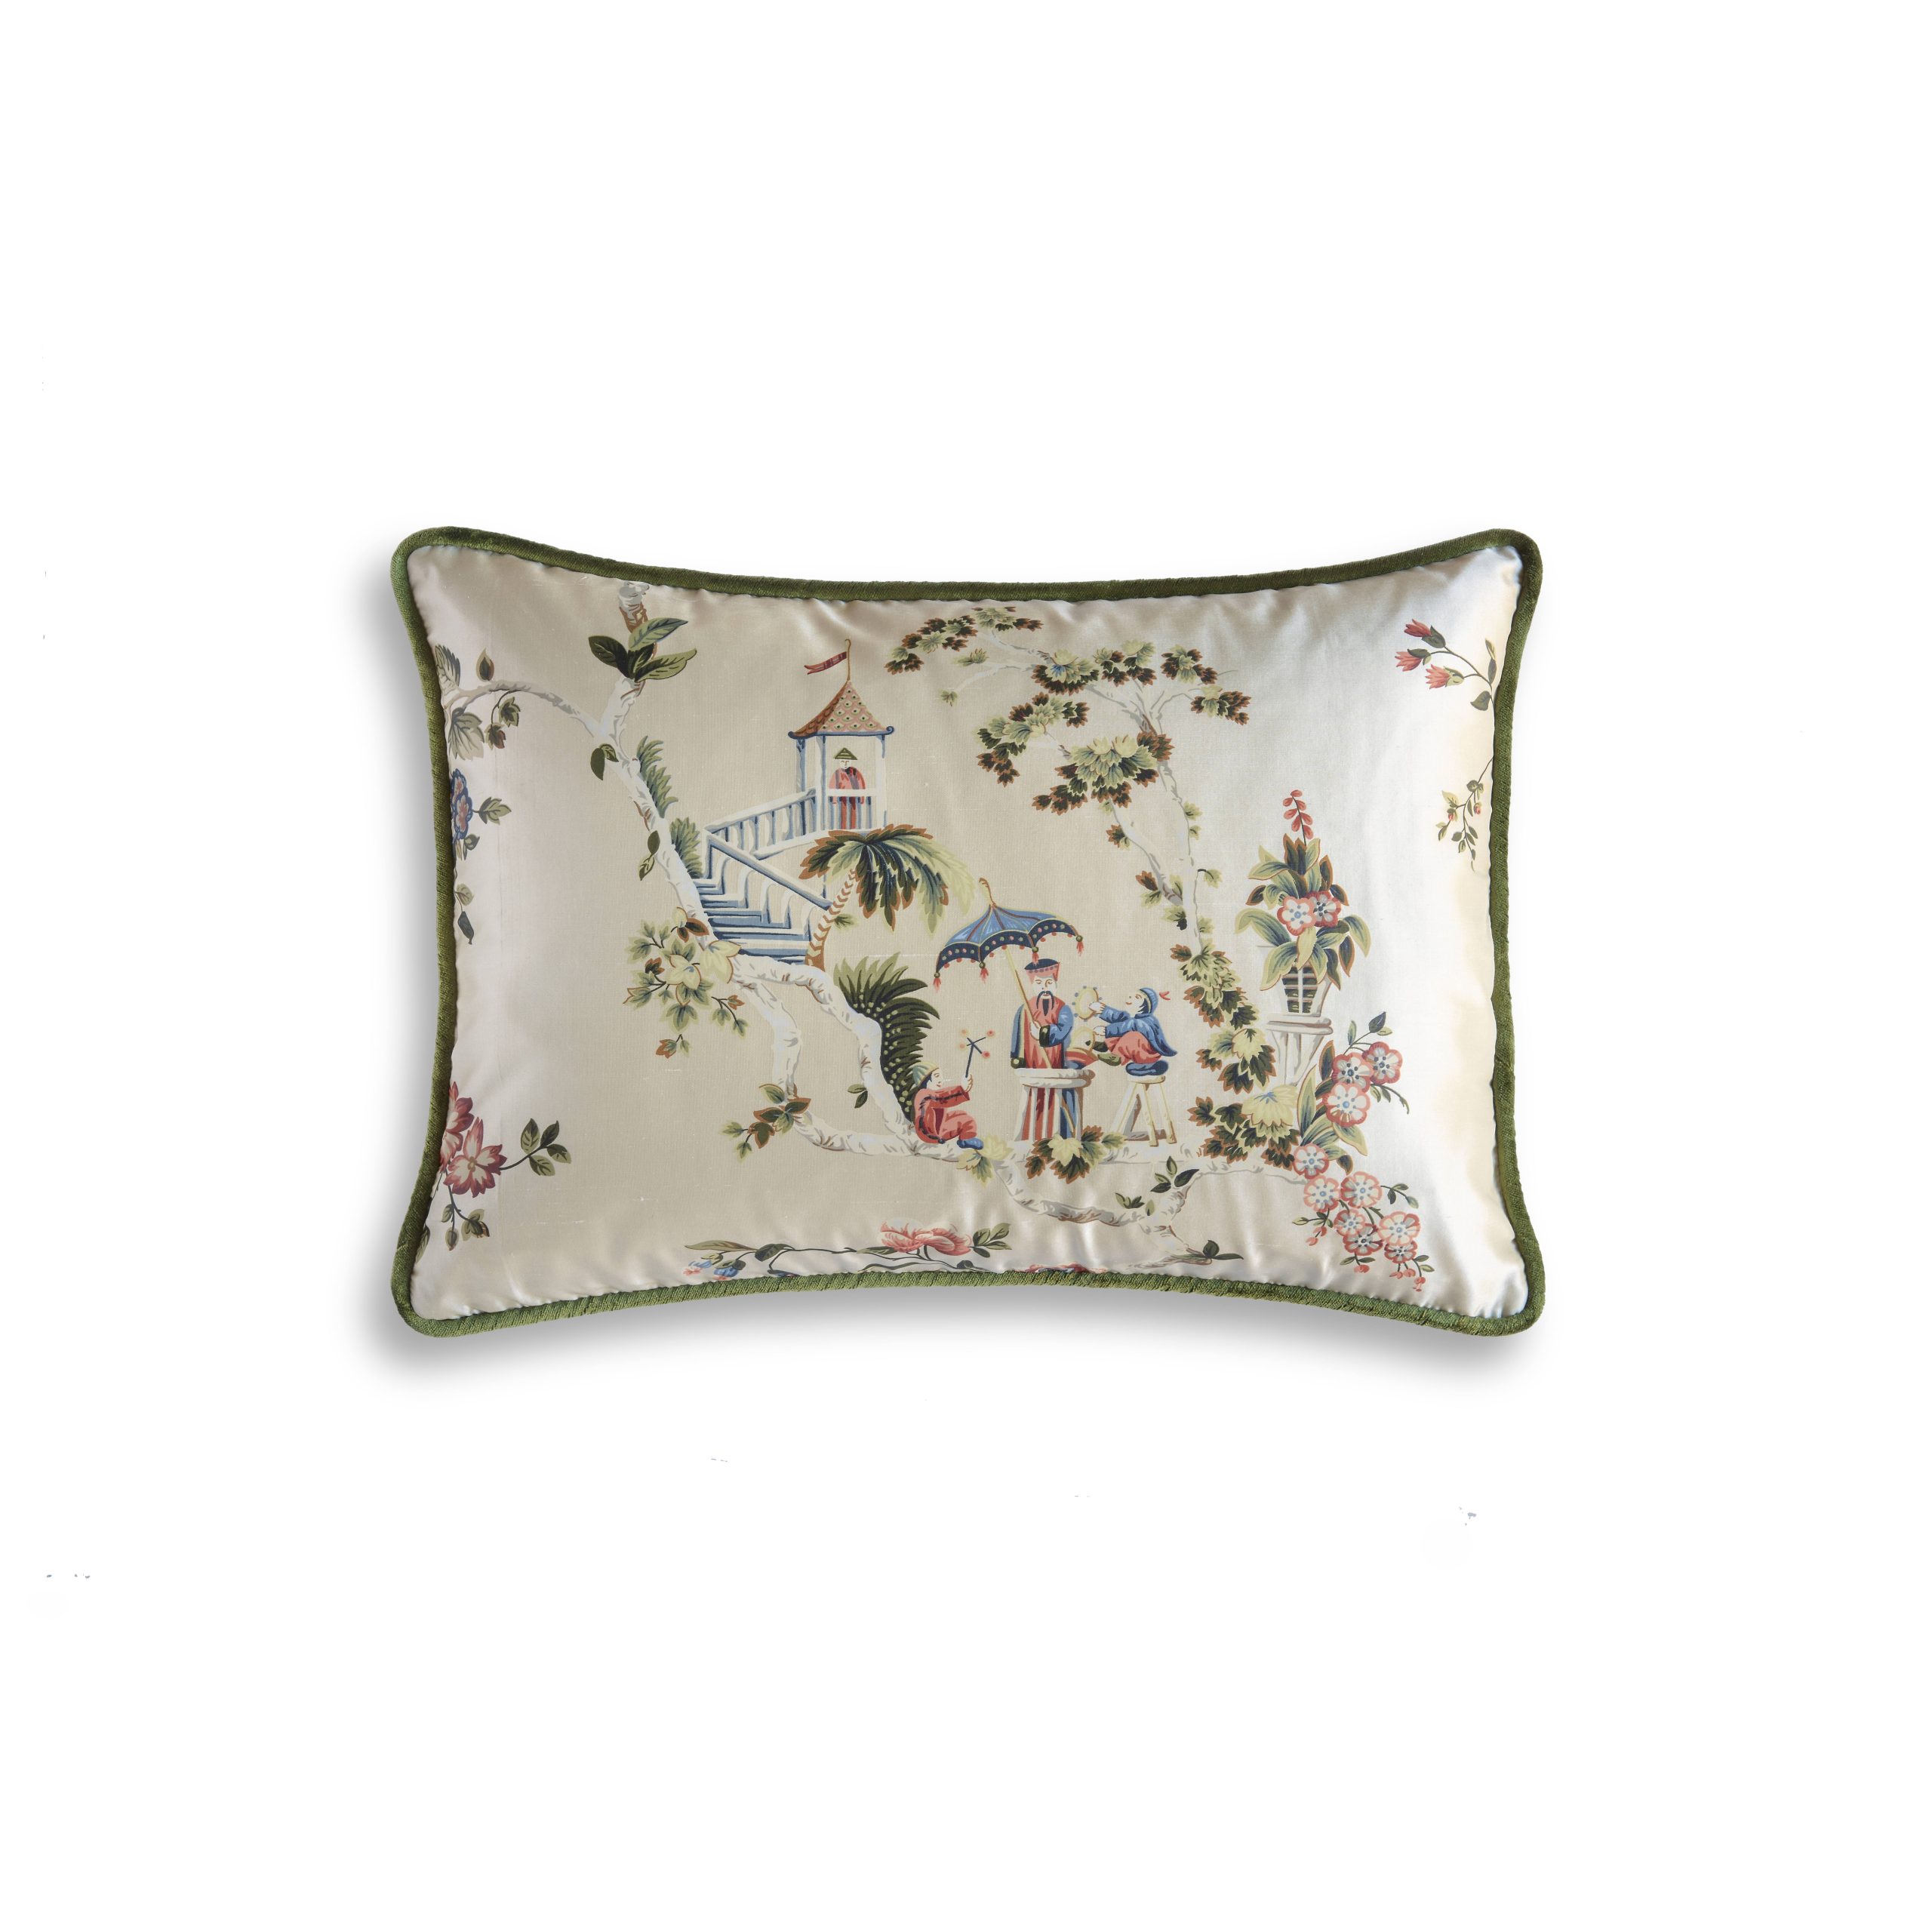 Cathay cushion - Ivory garden backed and piped in Capri silk velvet - Georgian green - Beaumont & Fletcher